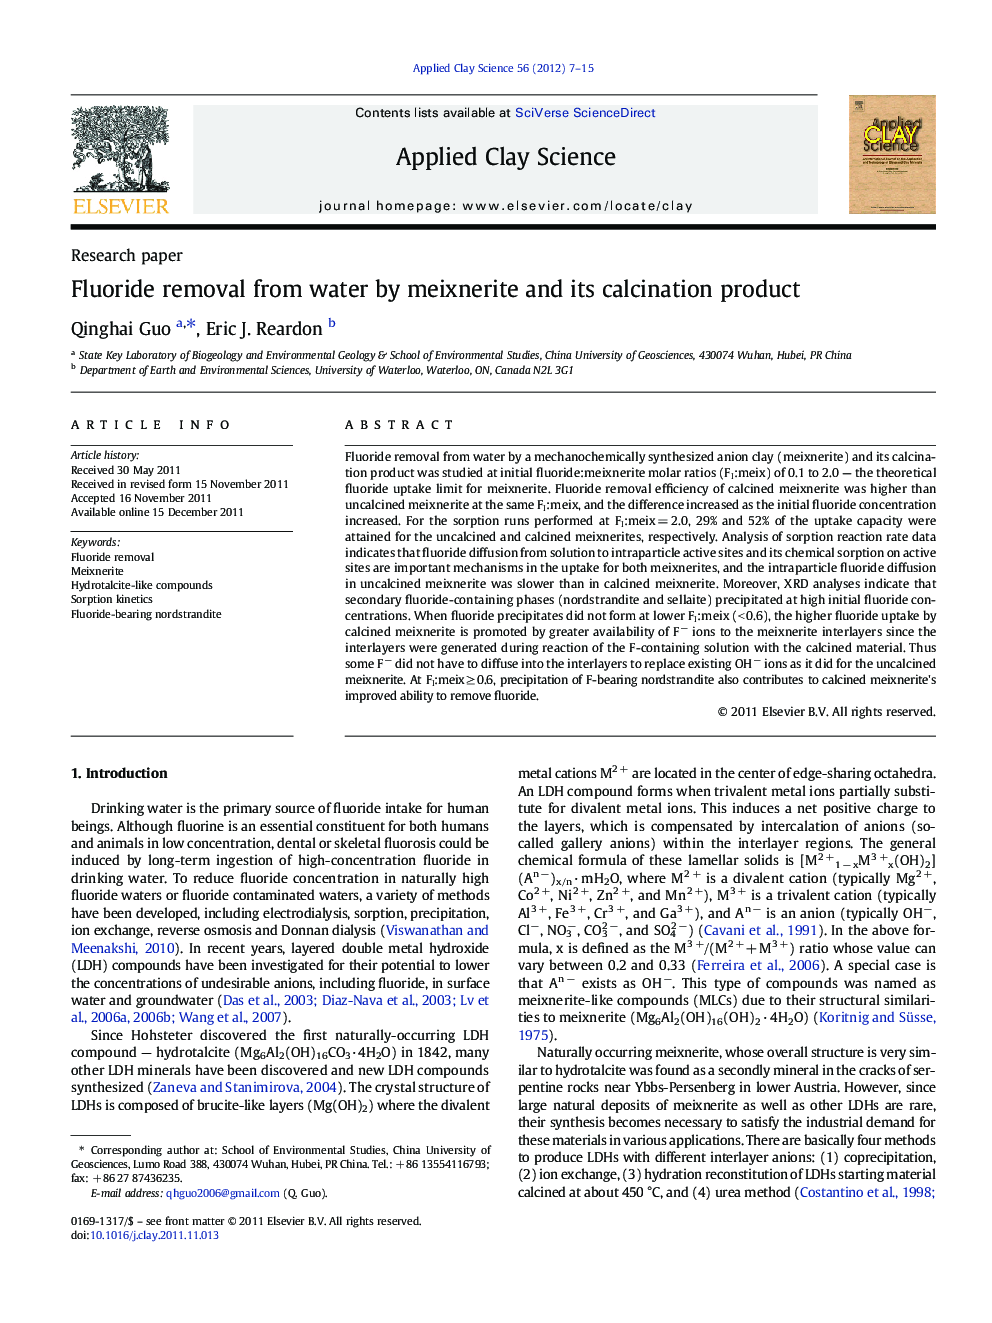 Fluoride removal from water by meixnerite and its calcination product